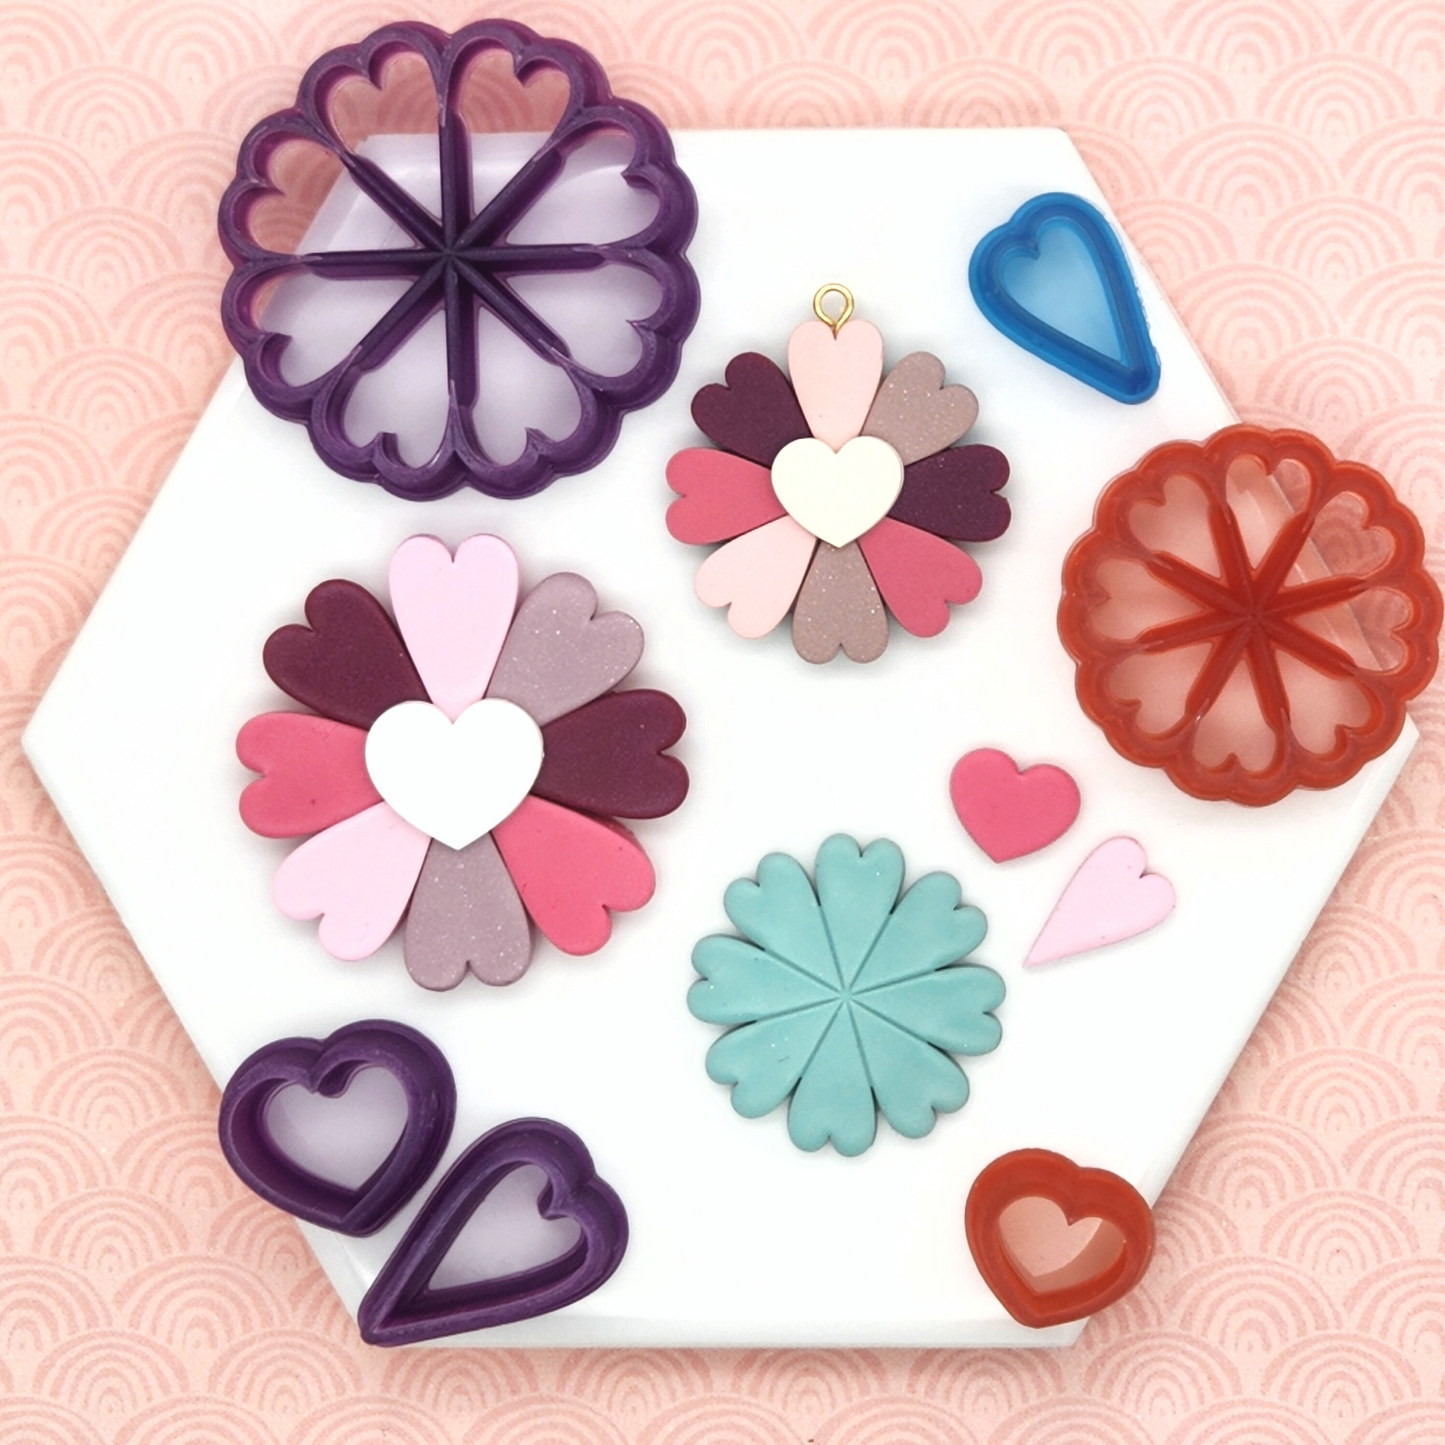 Heart Daisy Set Polymer Clay Cutter, including backpiece with debossing lines as guide for the petals, Petal Cutter, and Heart cutter for the center, with sample finish product.